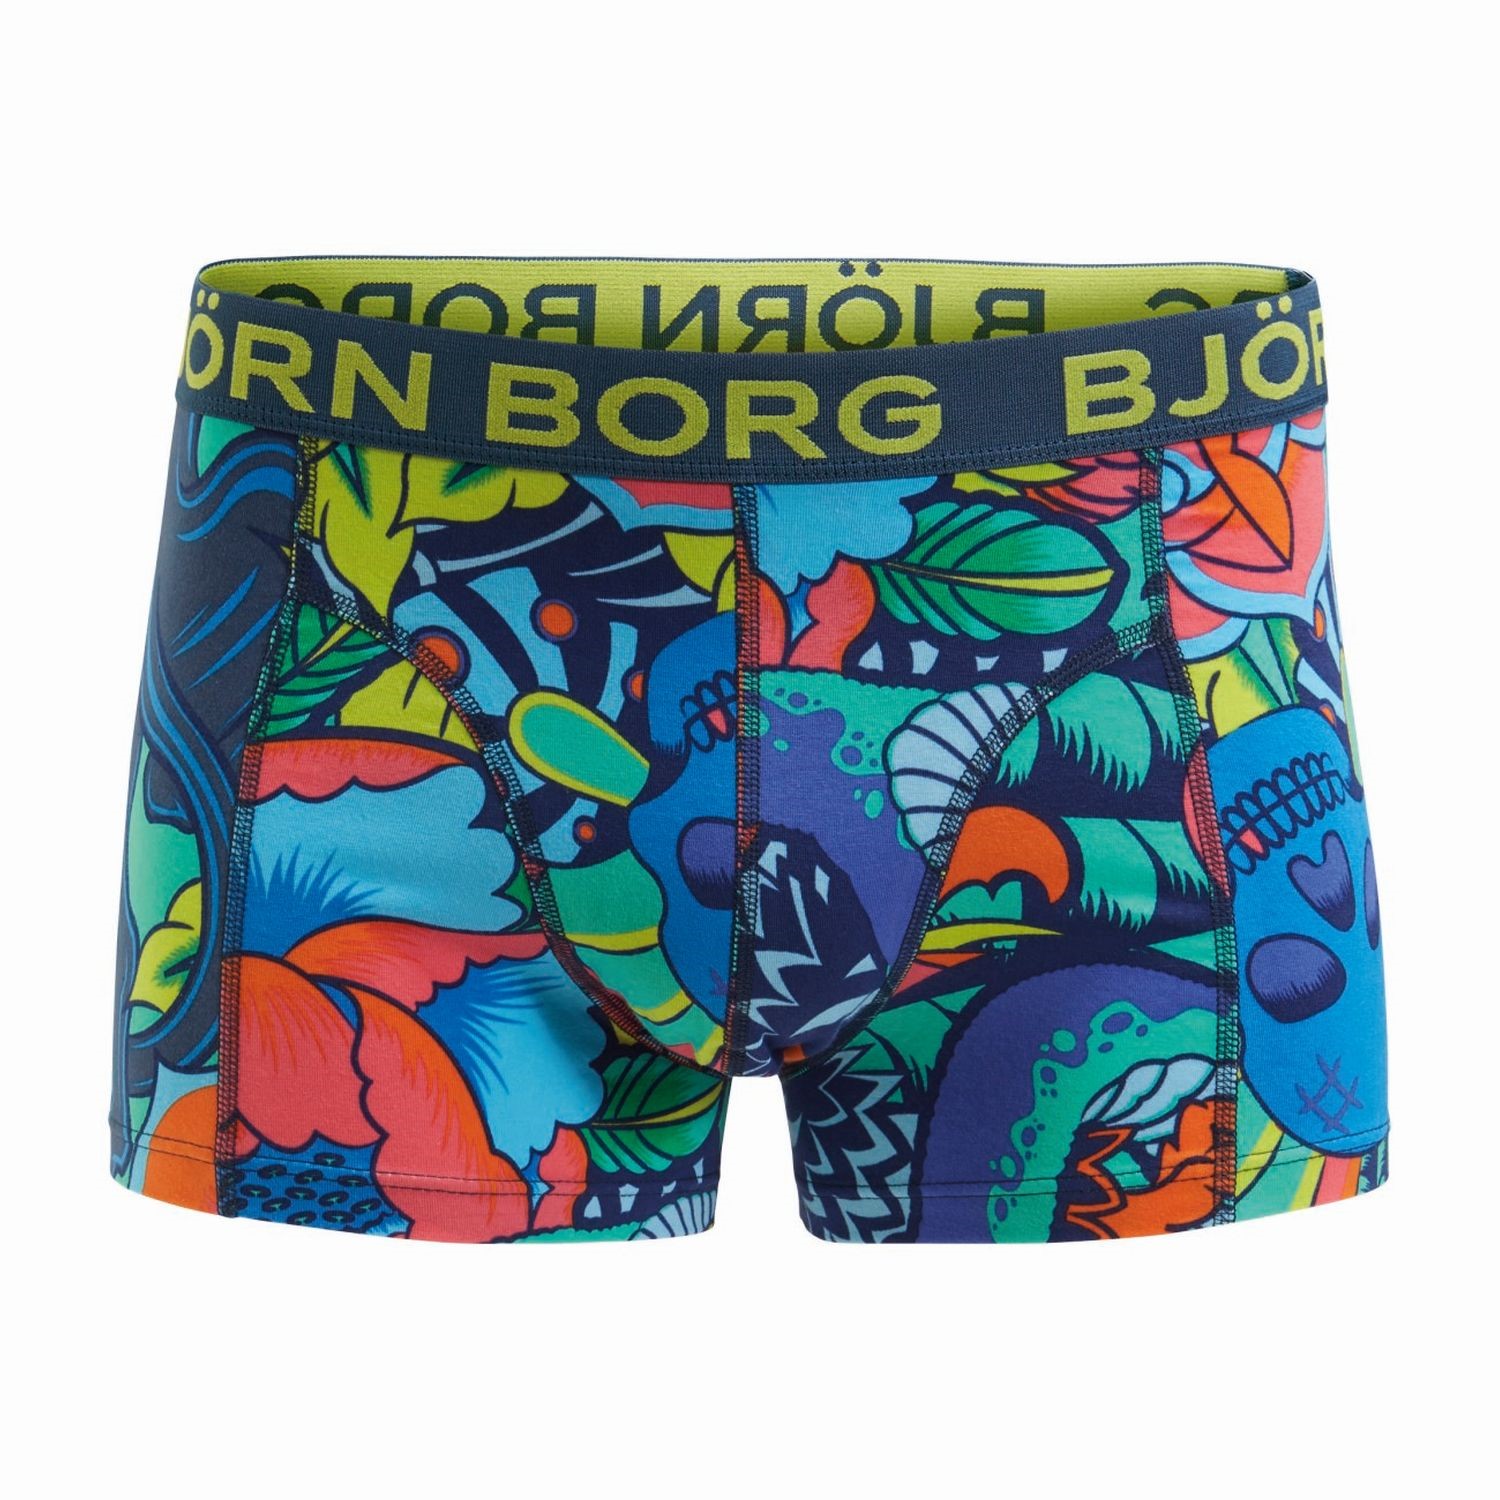 Björn Borg Short Shorts Welcome to the Jungle